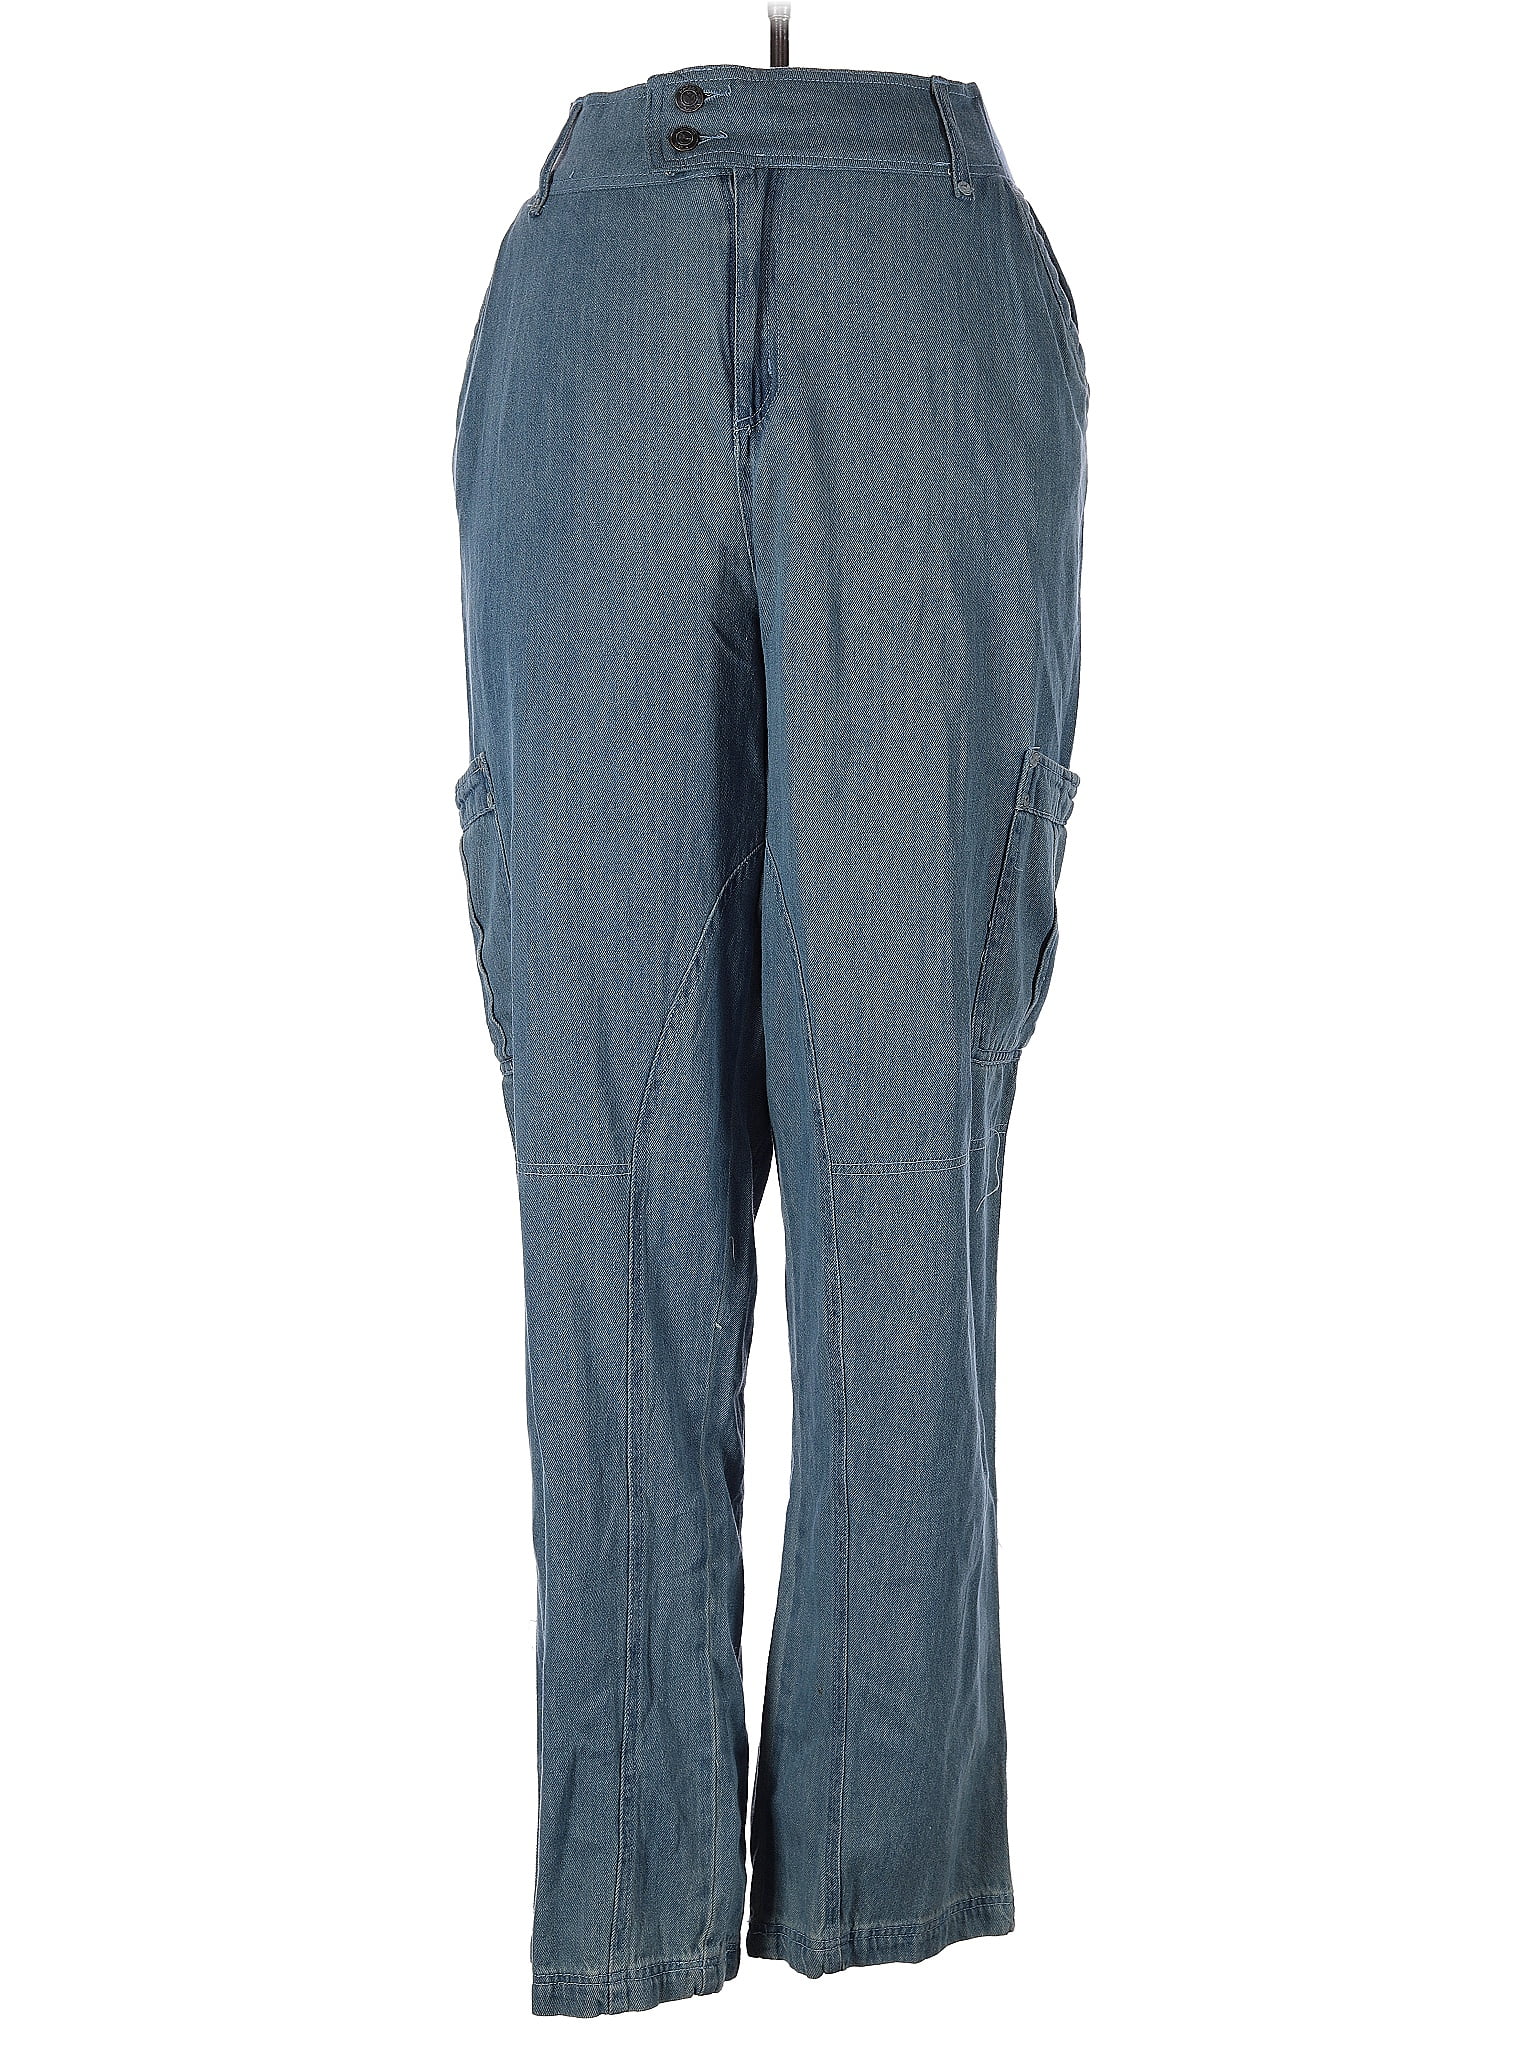 Woman Within 100% Cotton Solid Blue Cargo Pants Size 16 - 64% off